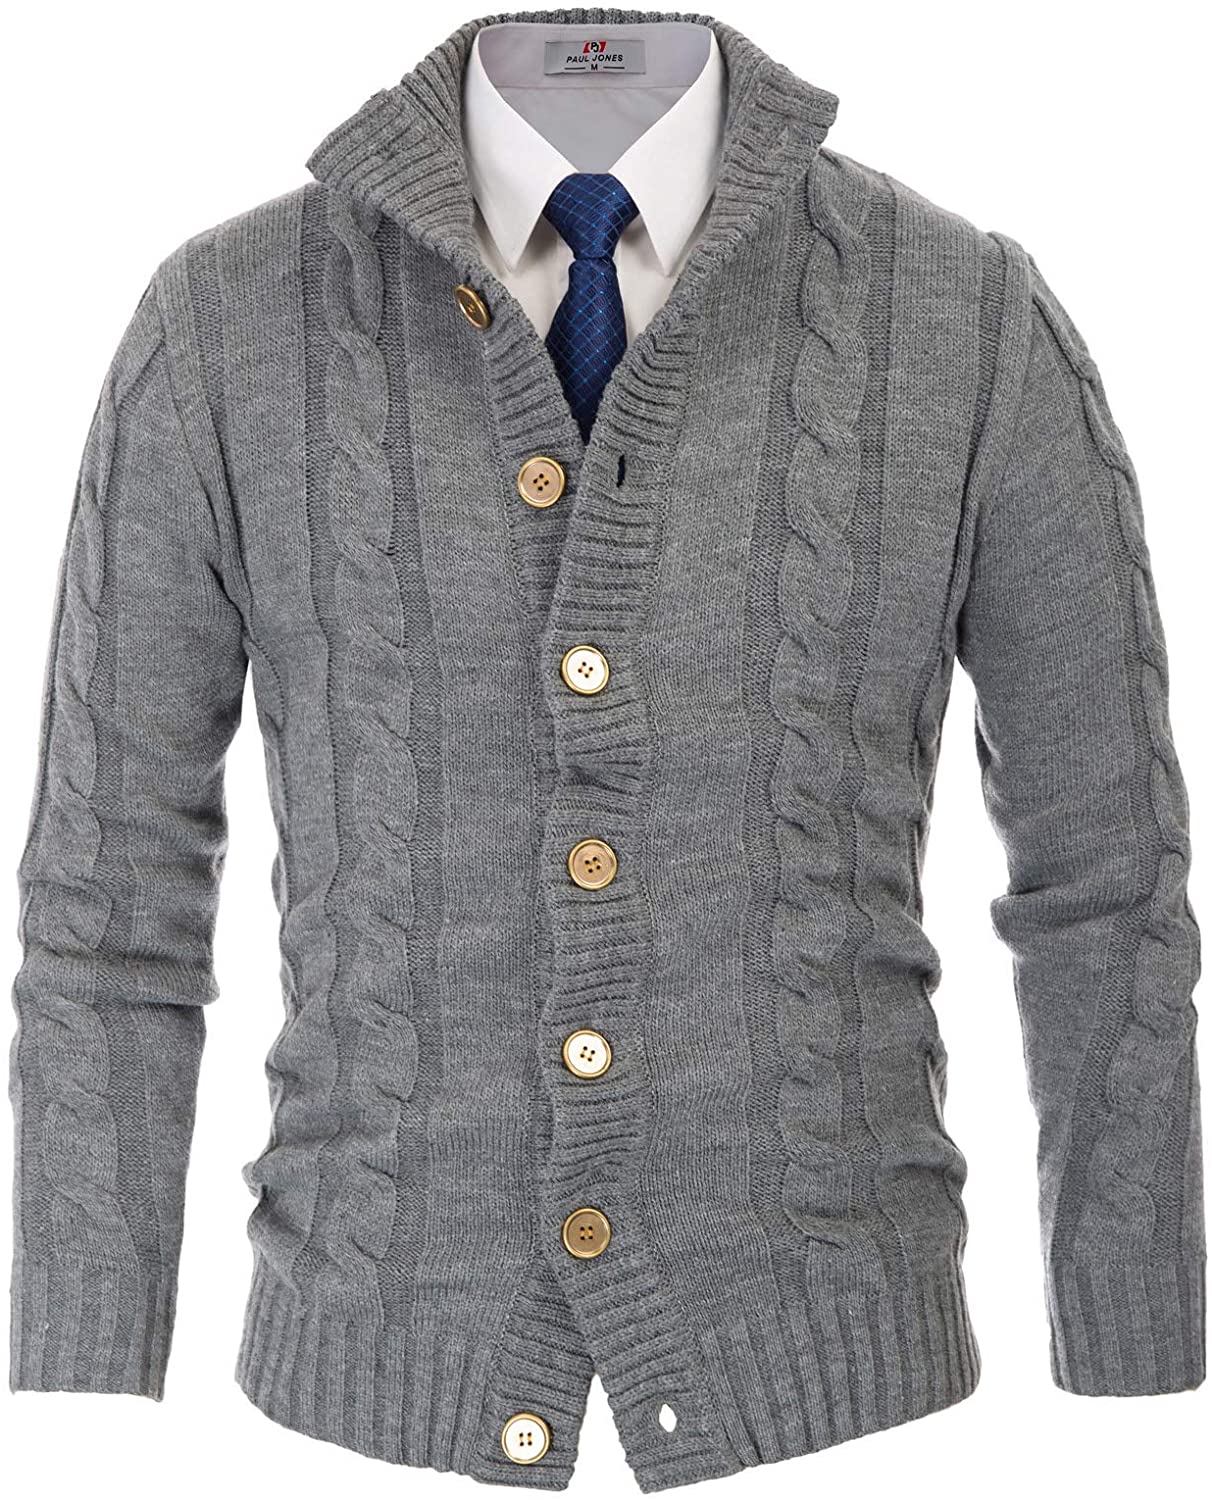 Mens Casual Stand Collar Cardigan Button Down Cable Knitted Sweater